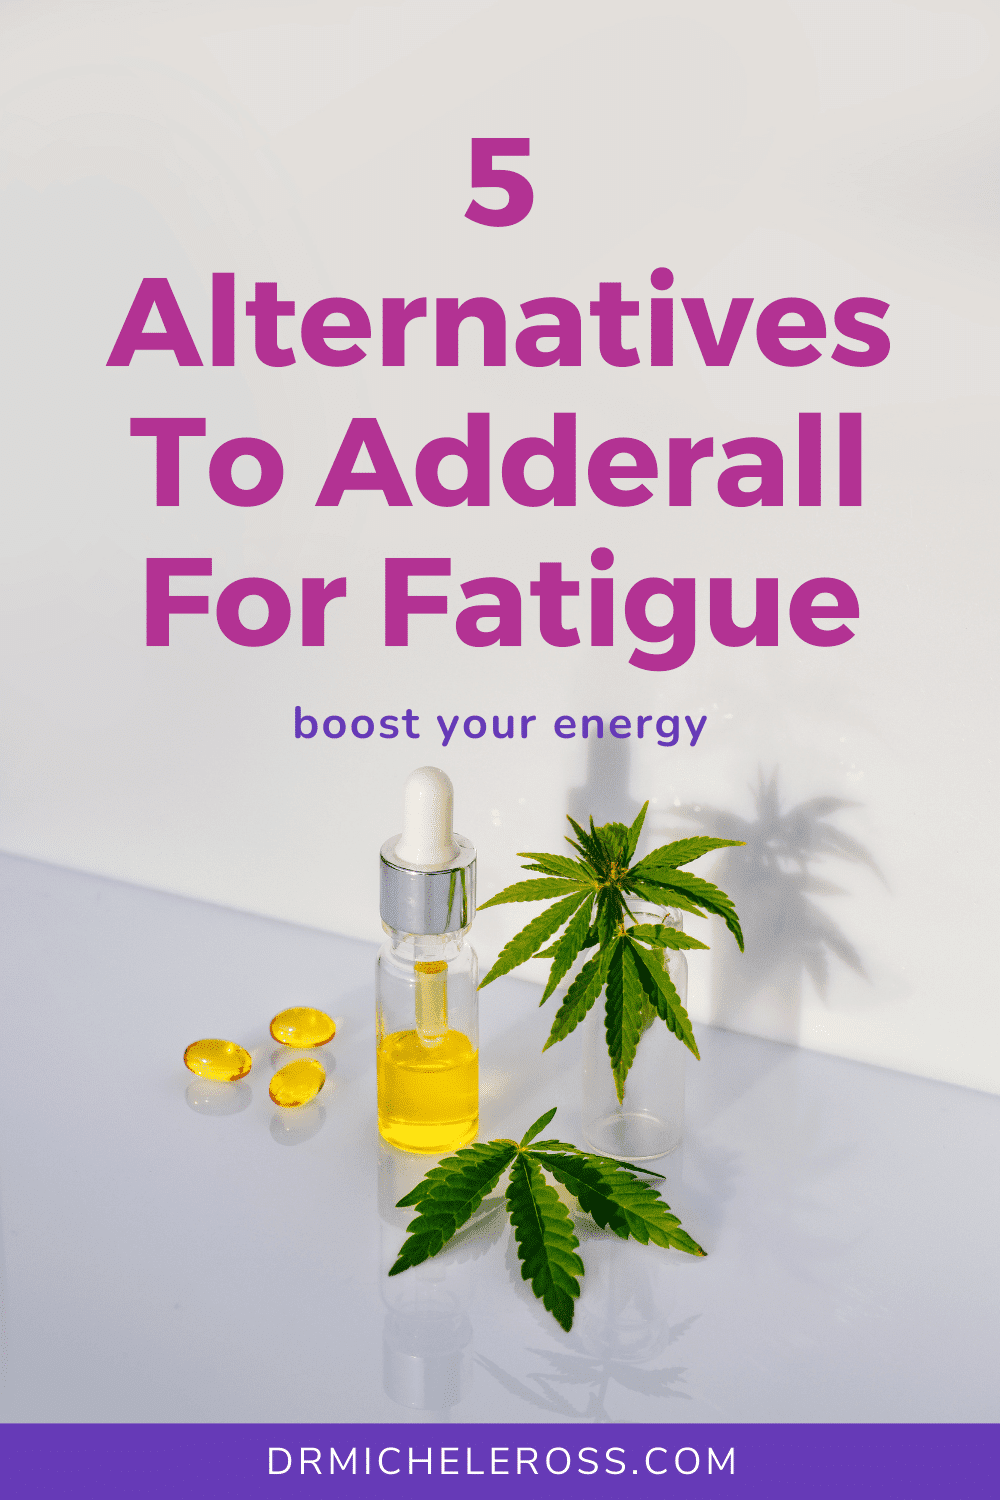 5 Alternatives To Adderall for Fatigue